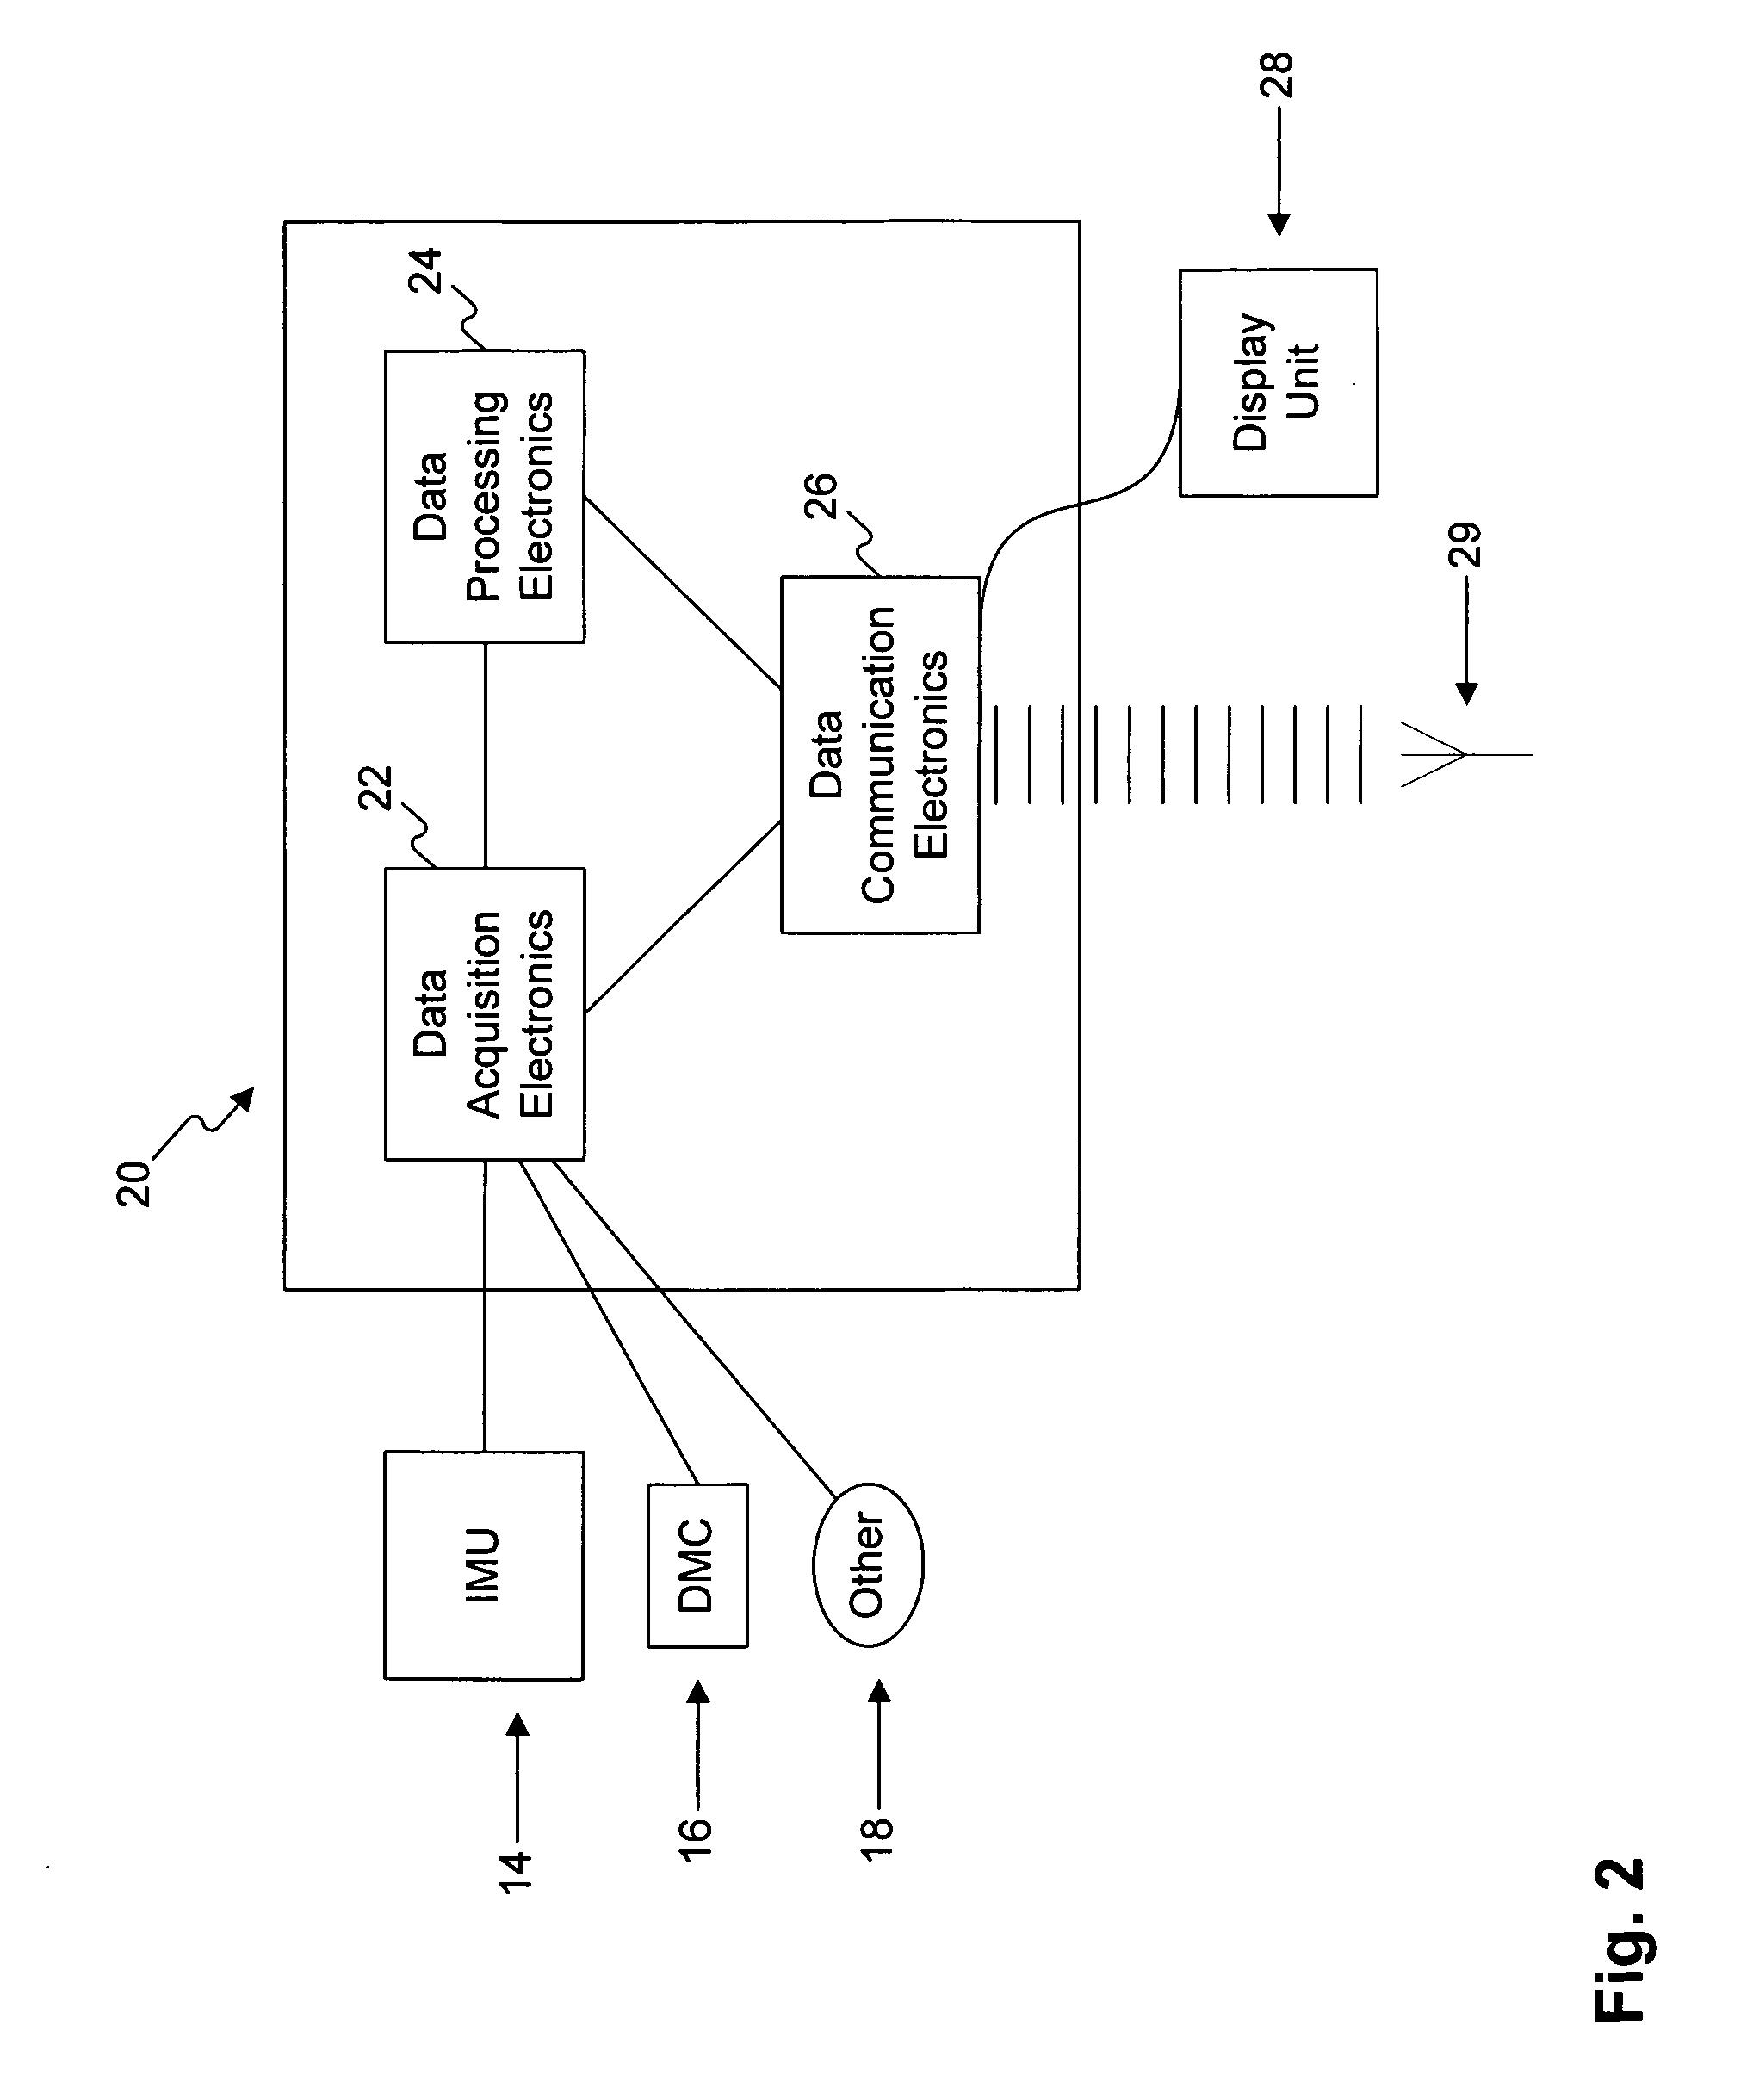 Method and computer-readable storage medium with instructions for processing data in an internal navigation system